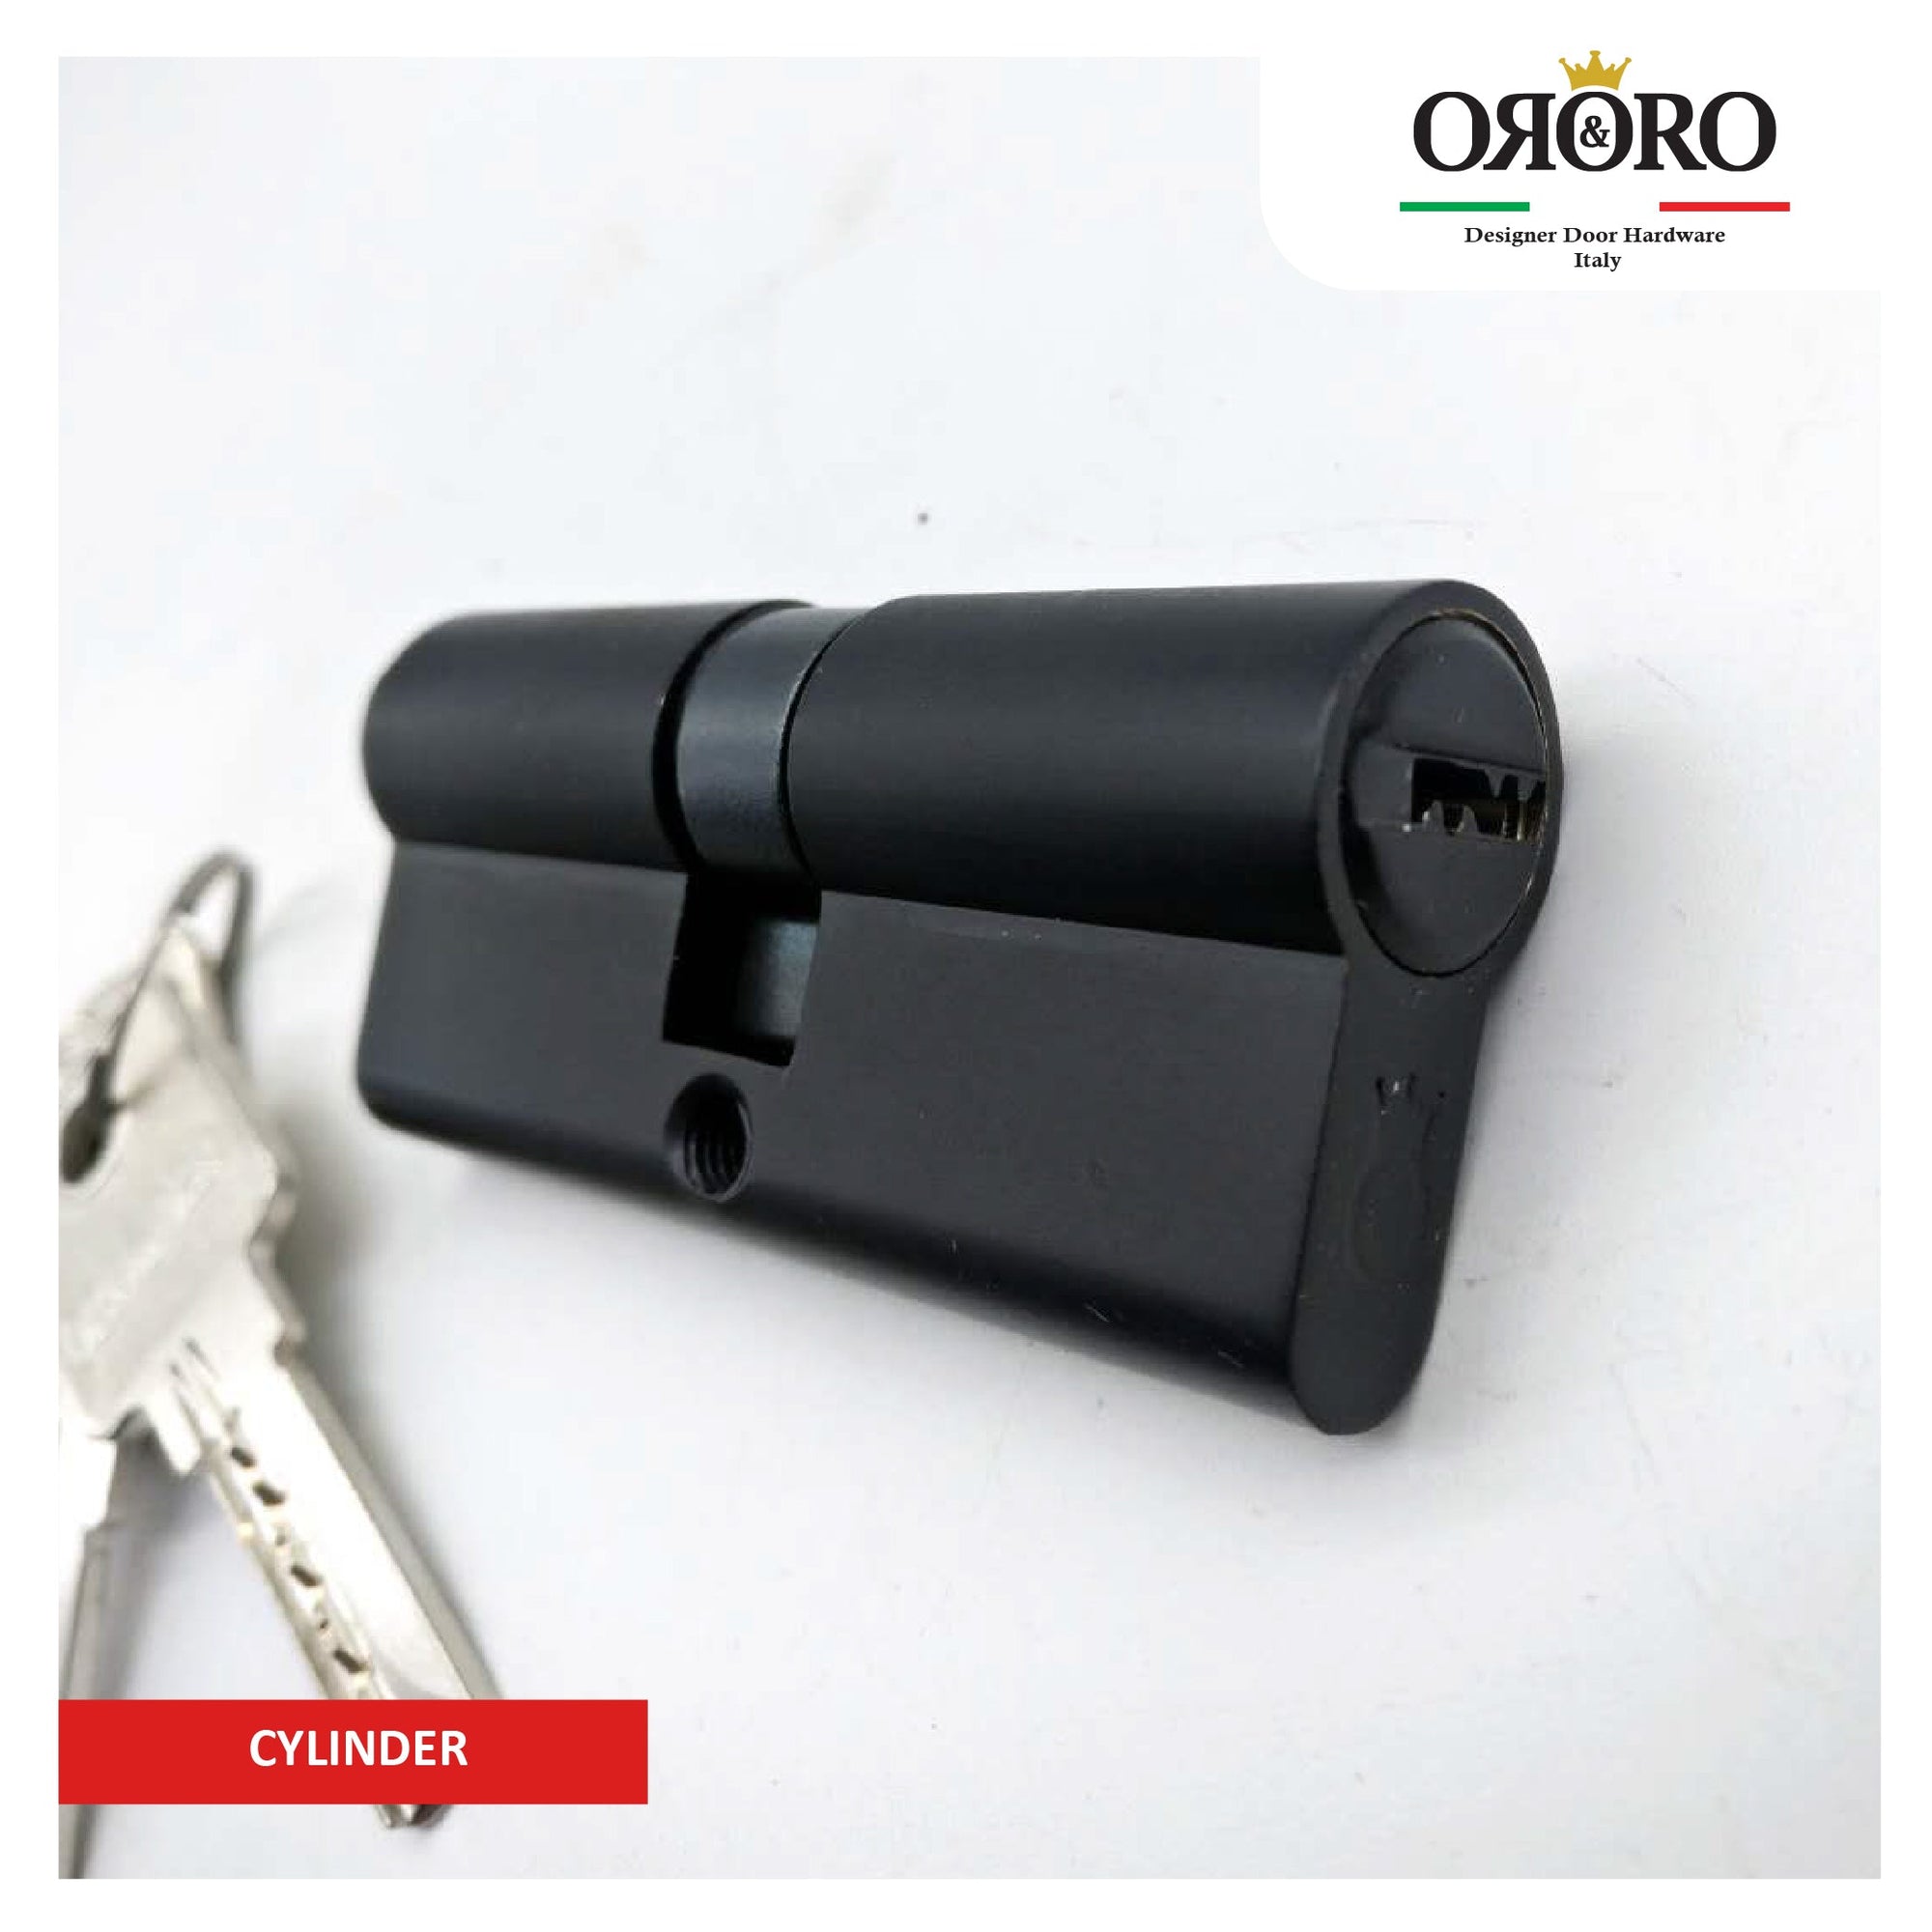 Oro & Oro Cylinder - Reliable and Durable Locking Solutions for Enhanced Door Security